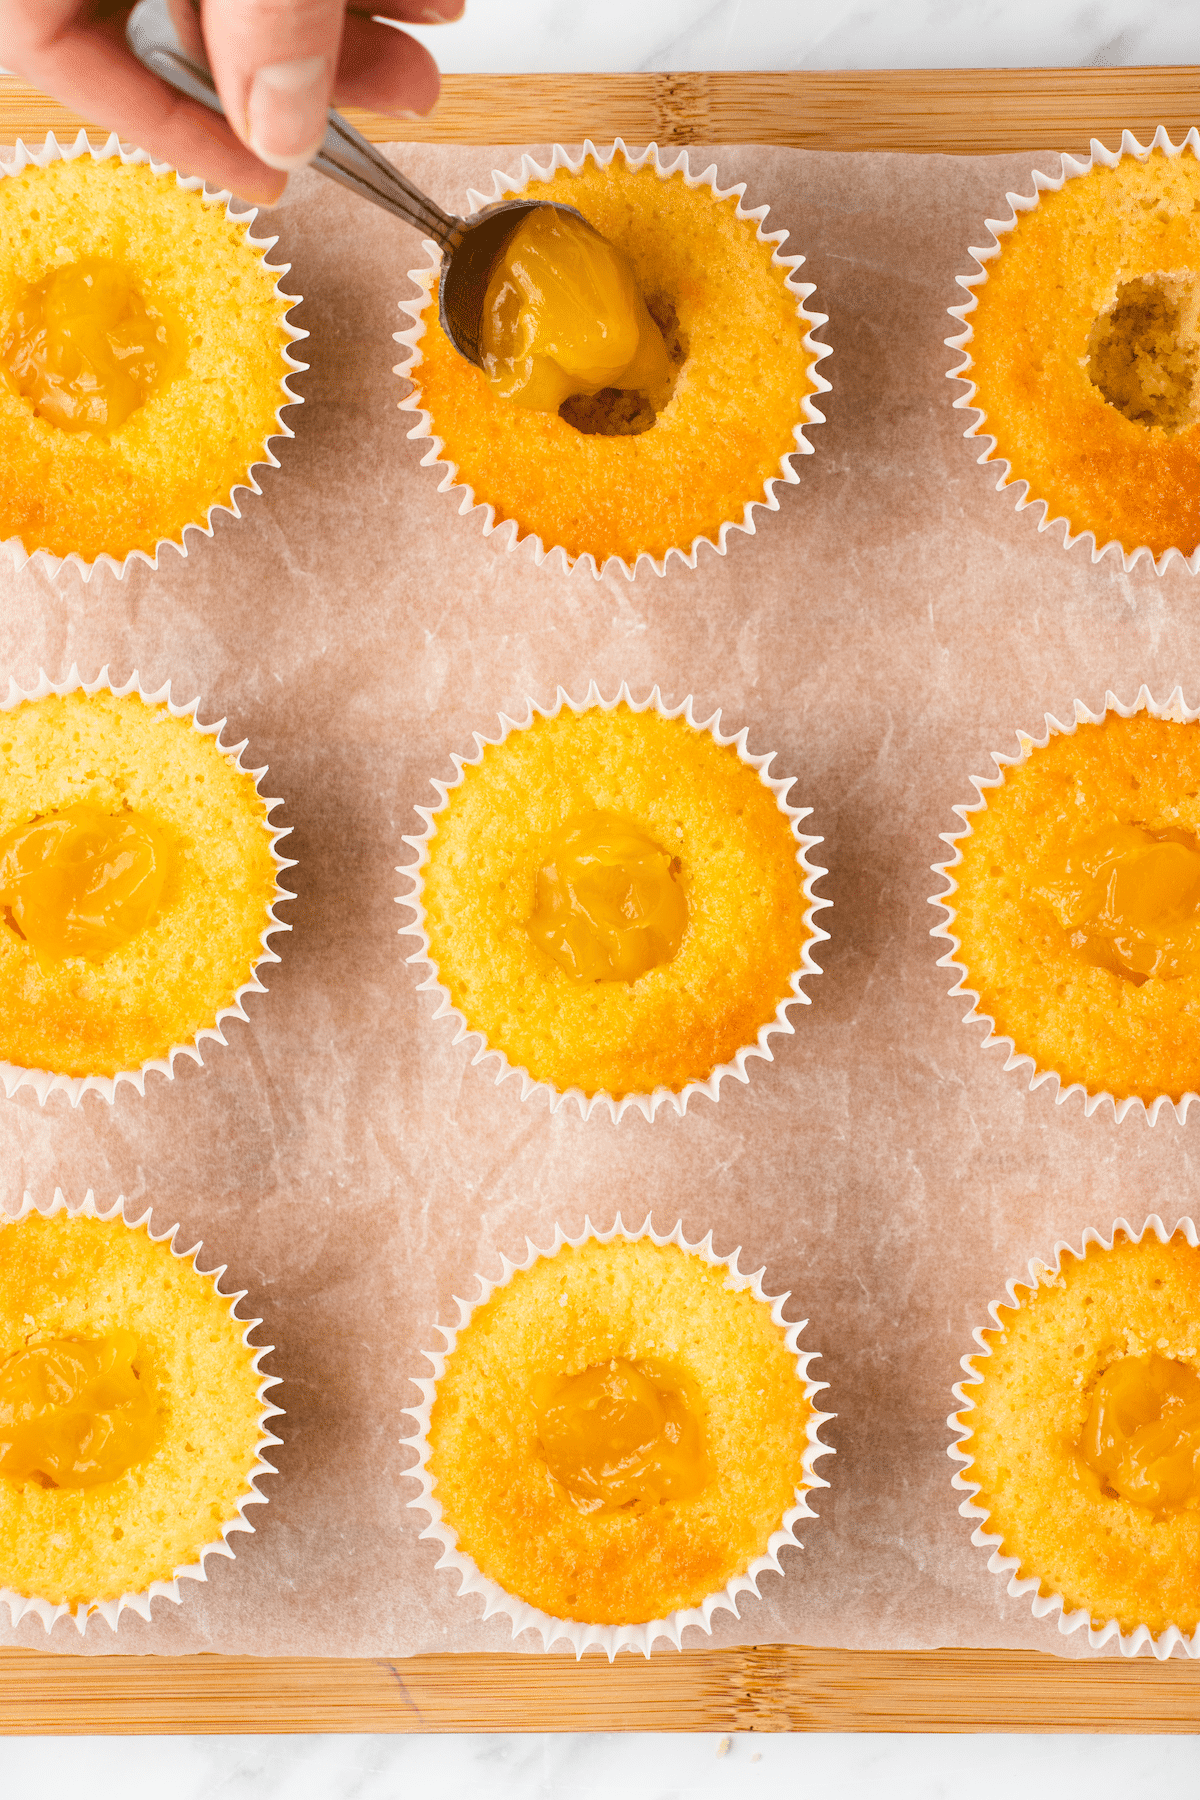 Cupcakes being filled with lemon curd